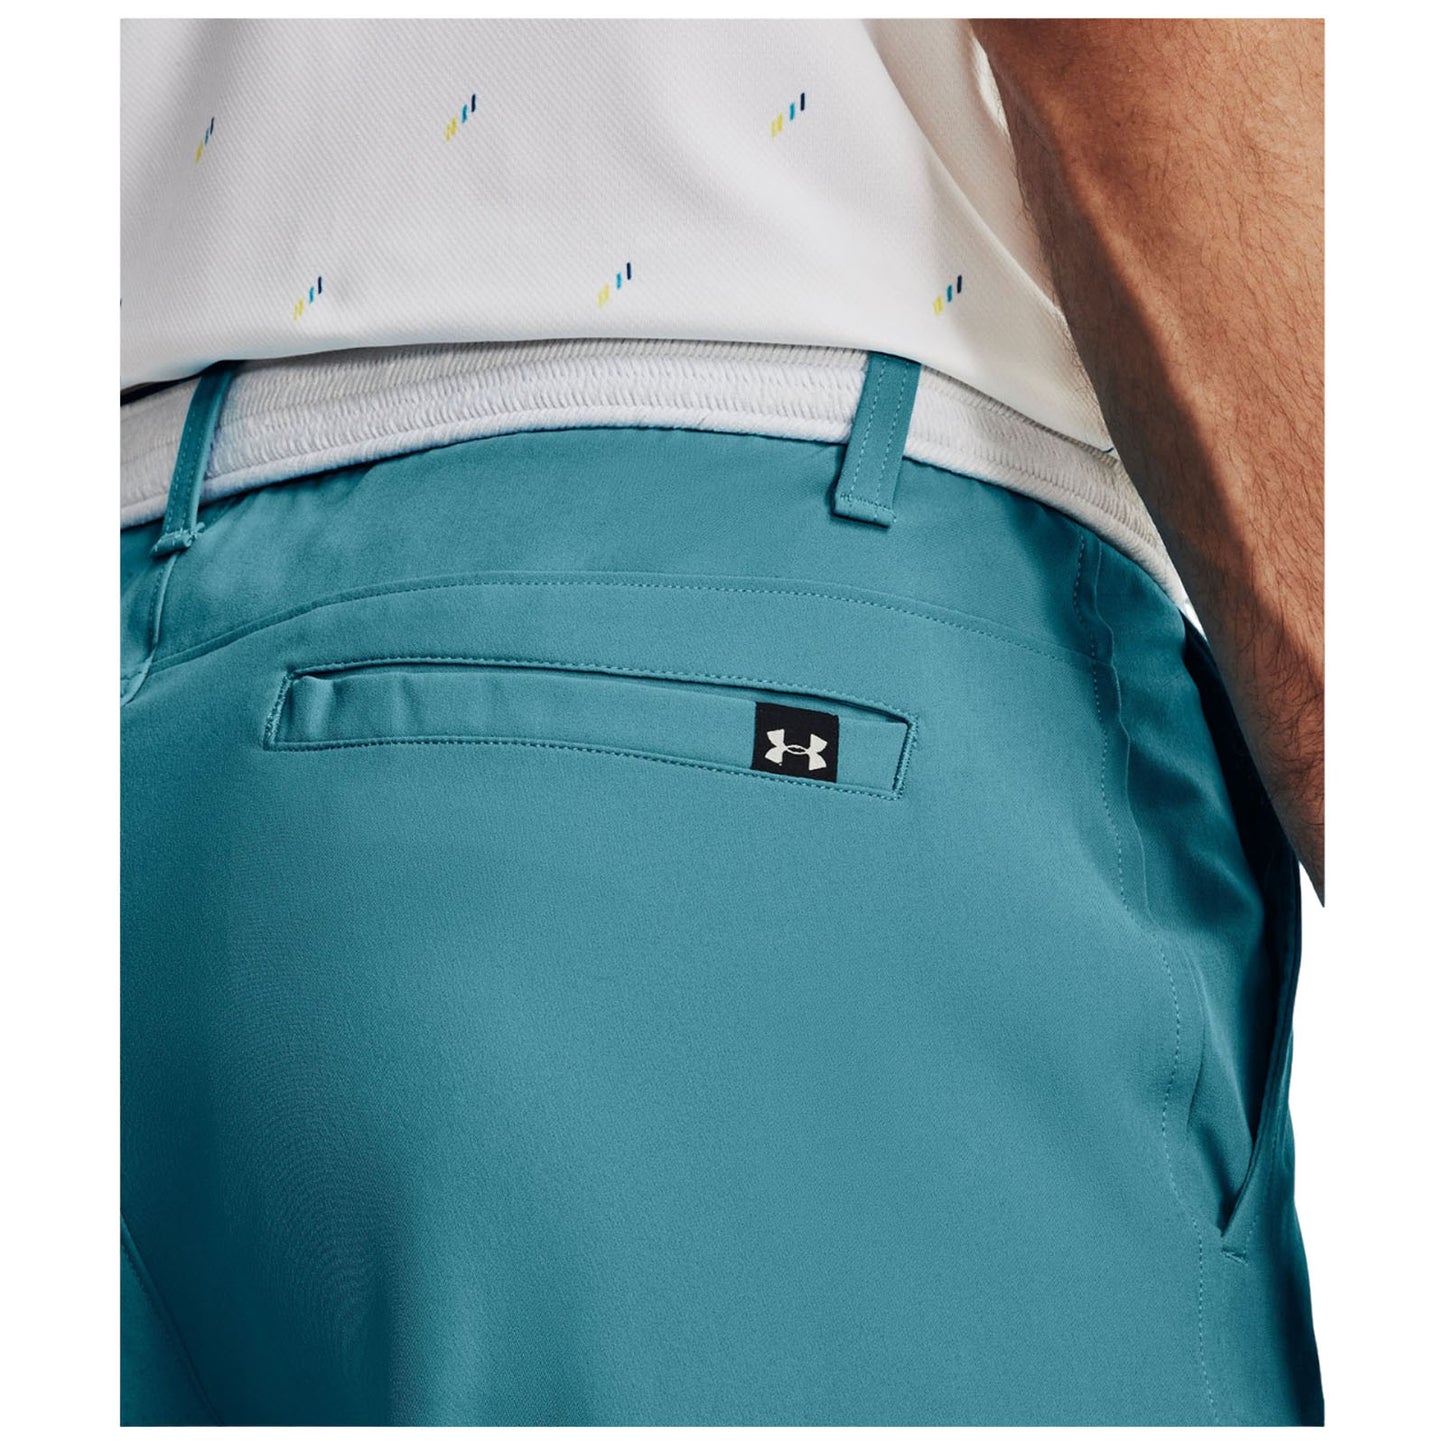 Under Armour Mens Drive Tapered Shorts